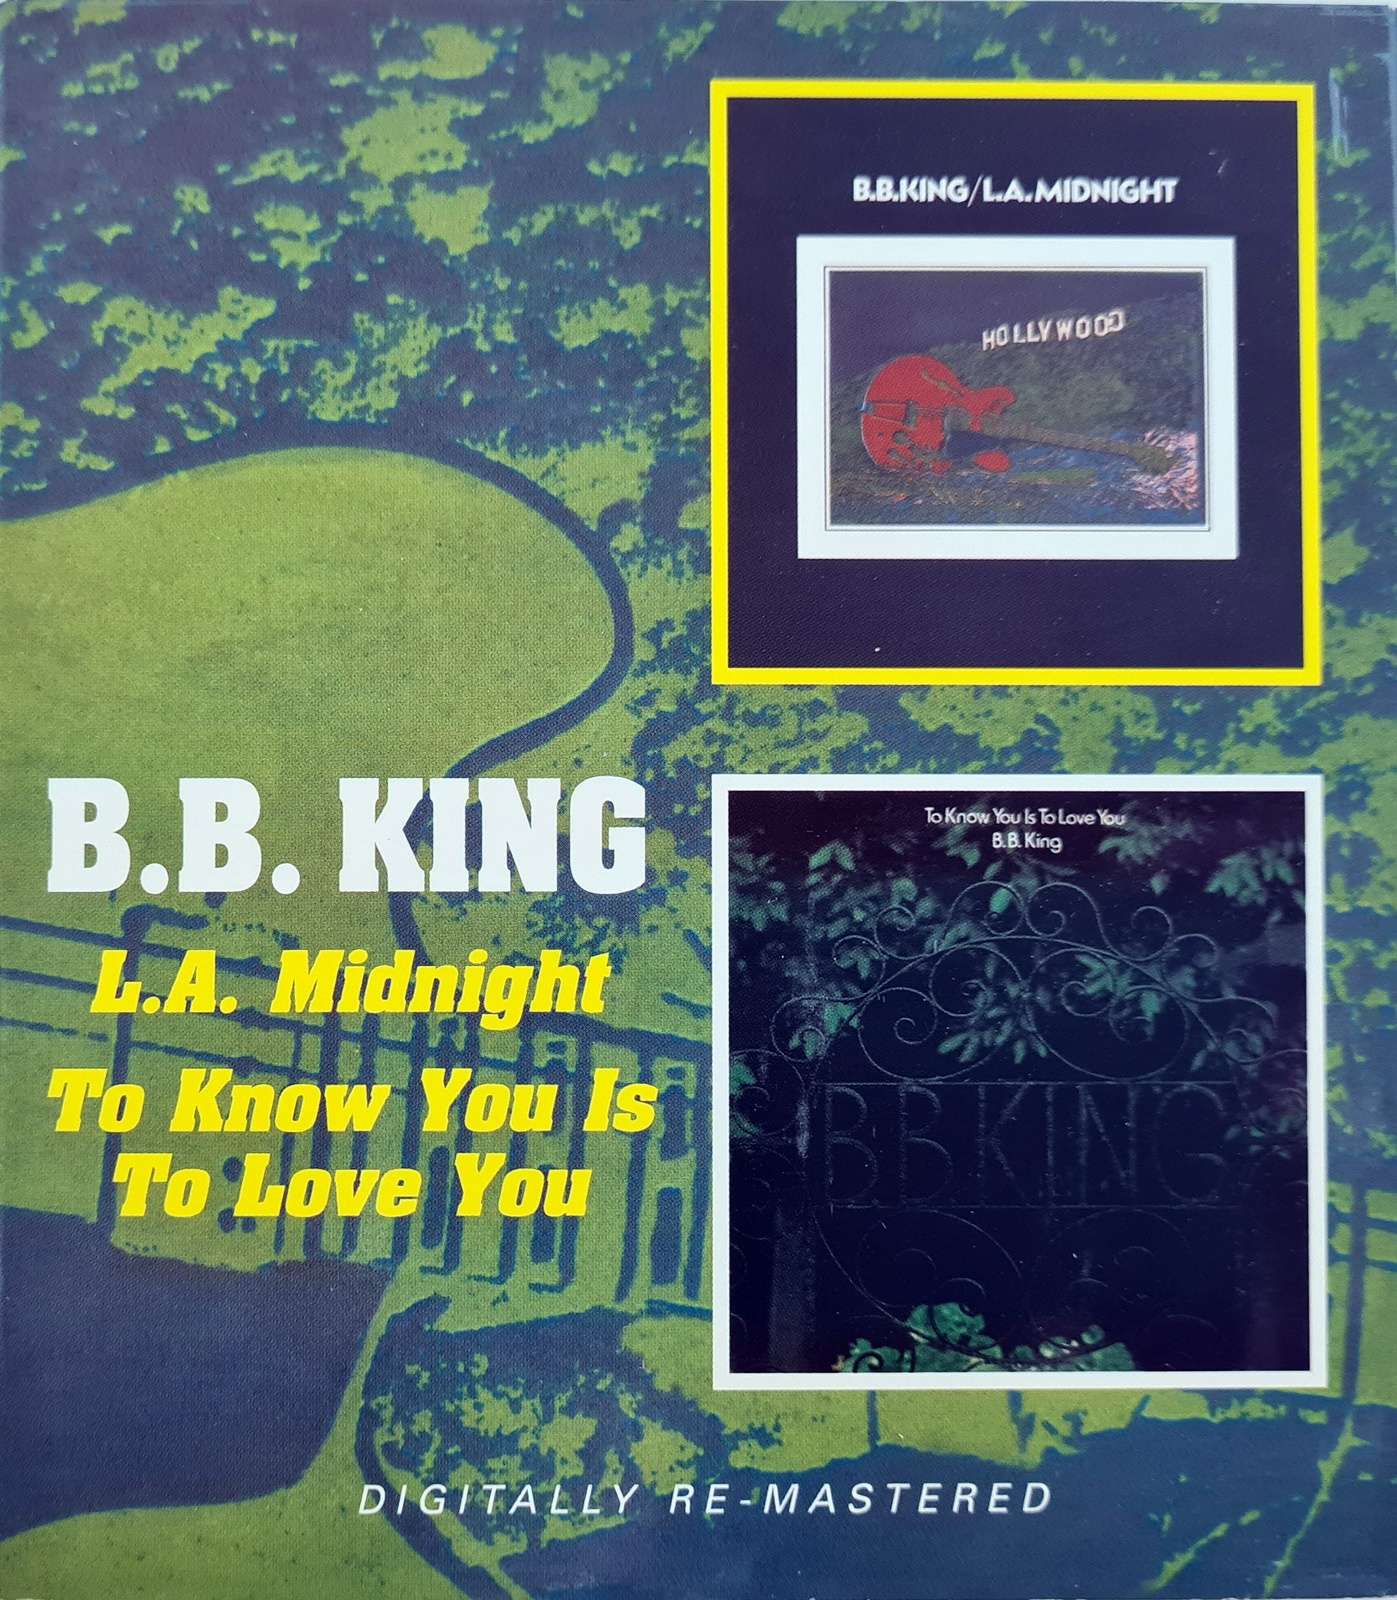 B.B. King - L.A. Midnight - To Know You is to Love You (CD)